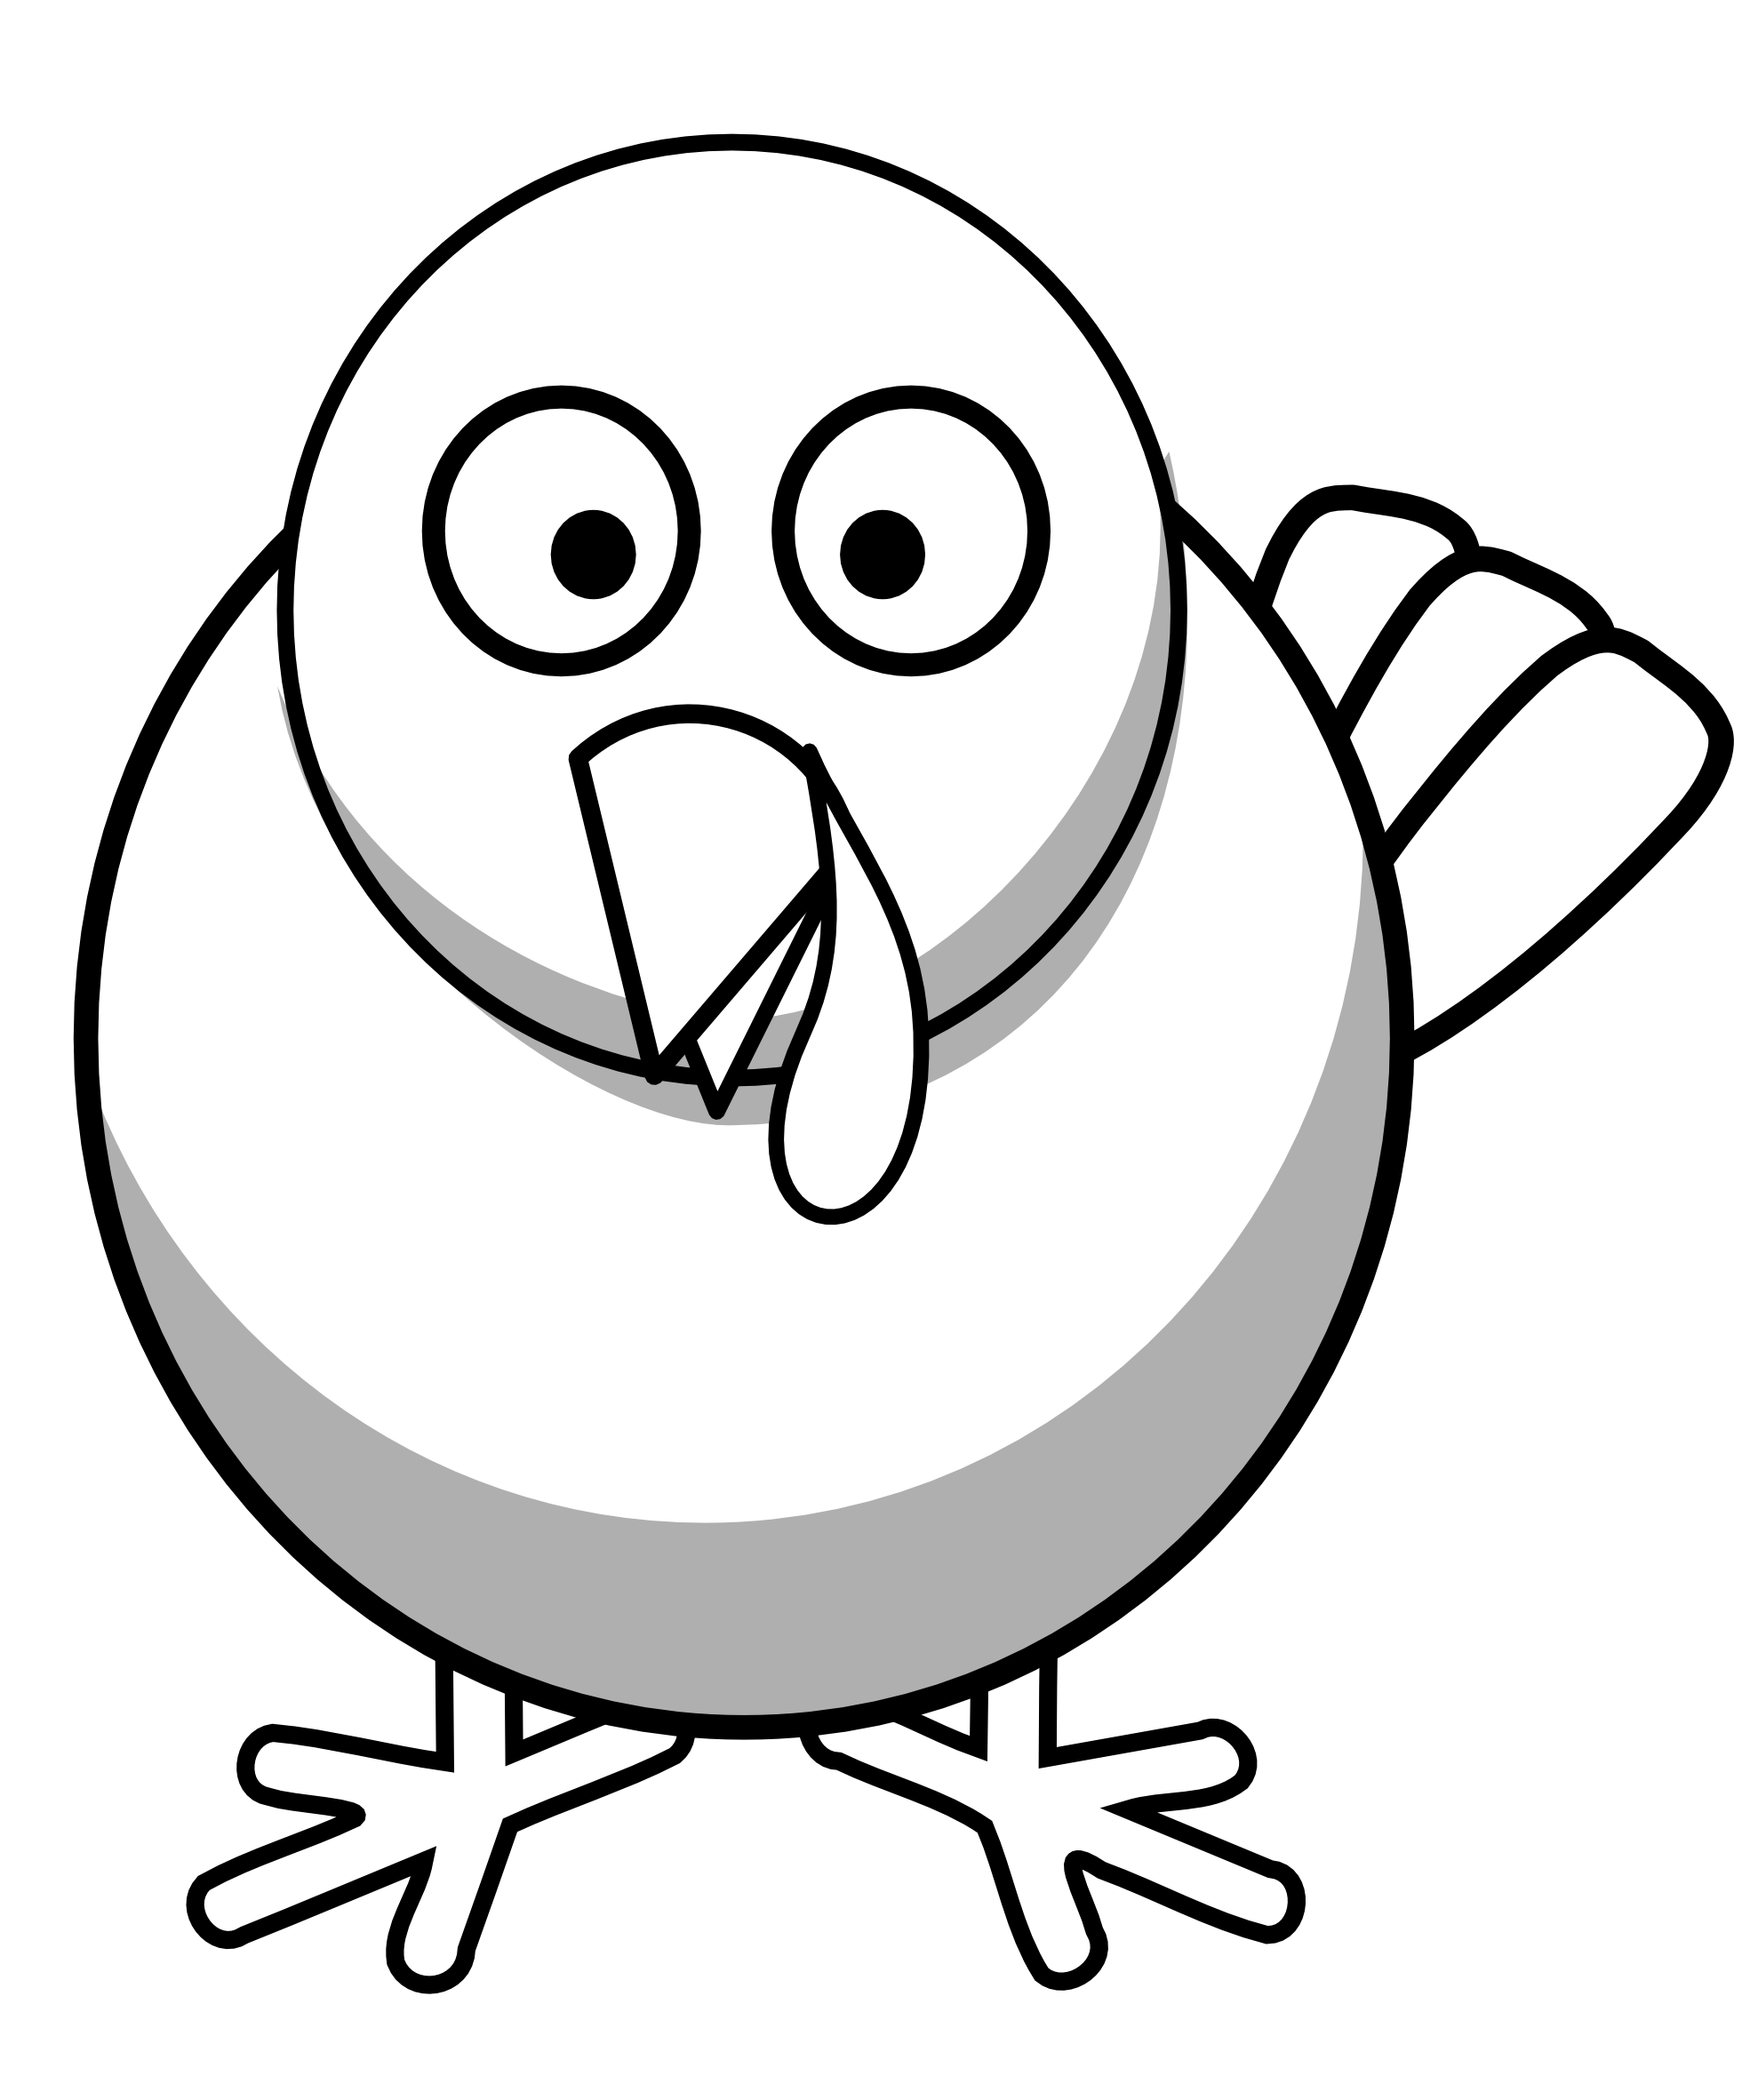 Running Turkey Clipart Black And White   Clipart Panda   Free Clipart